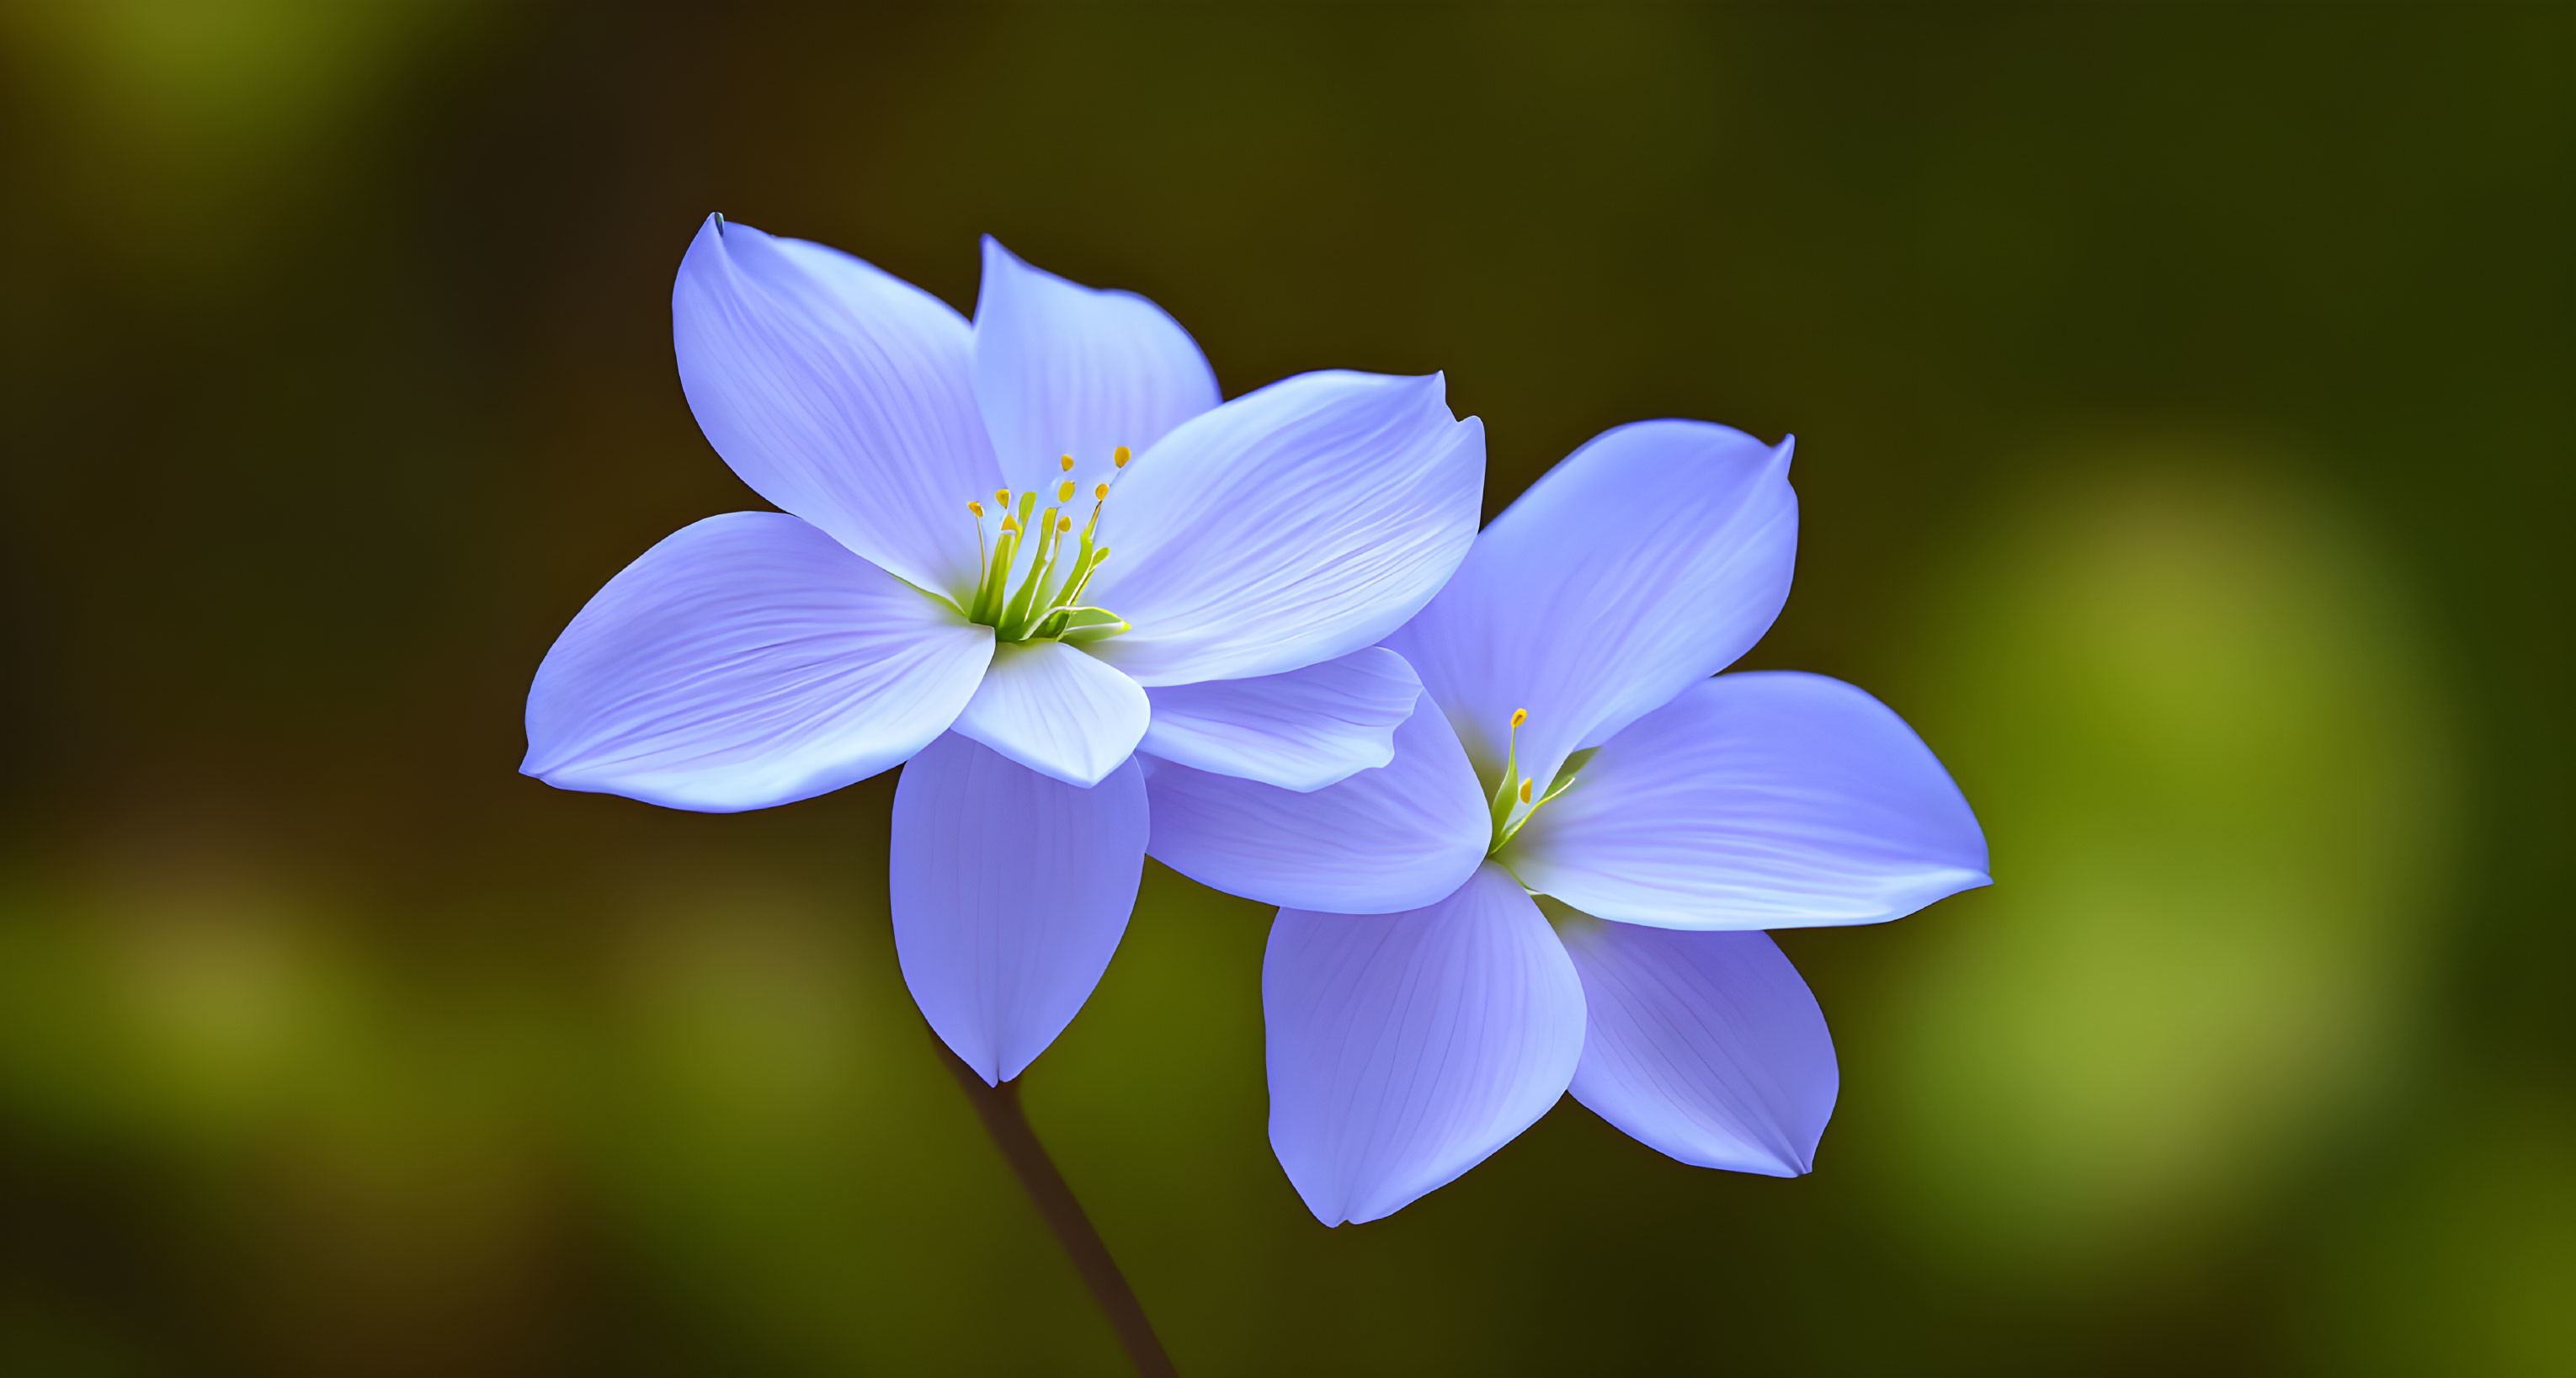 Delicate Blue Flowers with Translucent Petals on Blurred Green Background